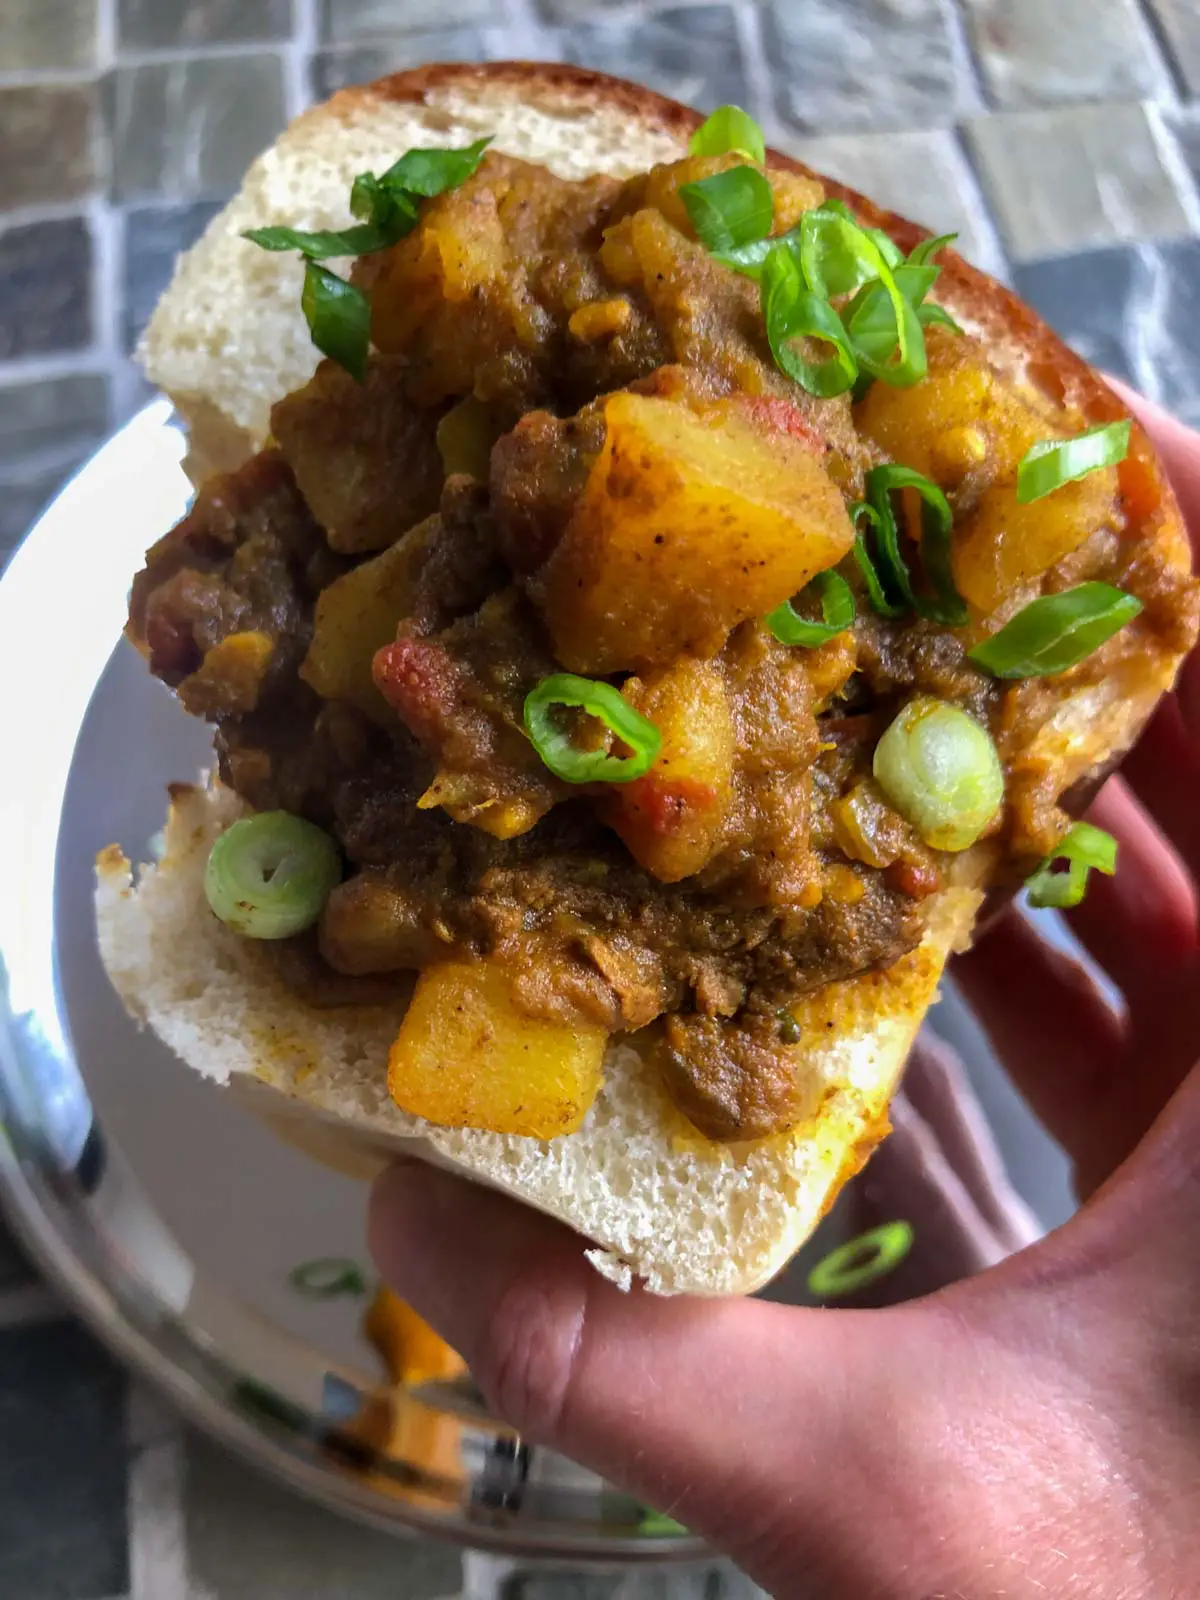 Lamb curry with potatoes and garnished with green onions in a hollowed out piece of white bread loaf being held by a hand.